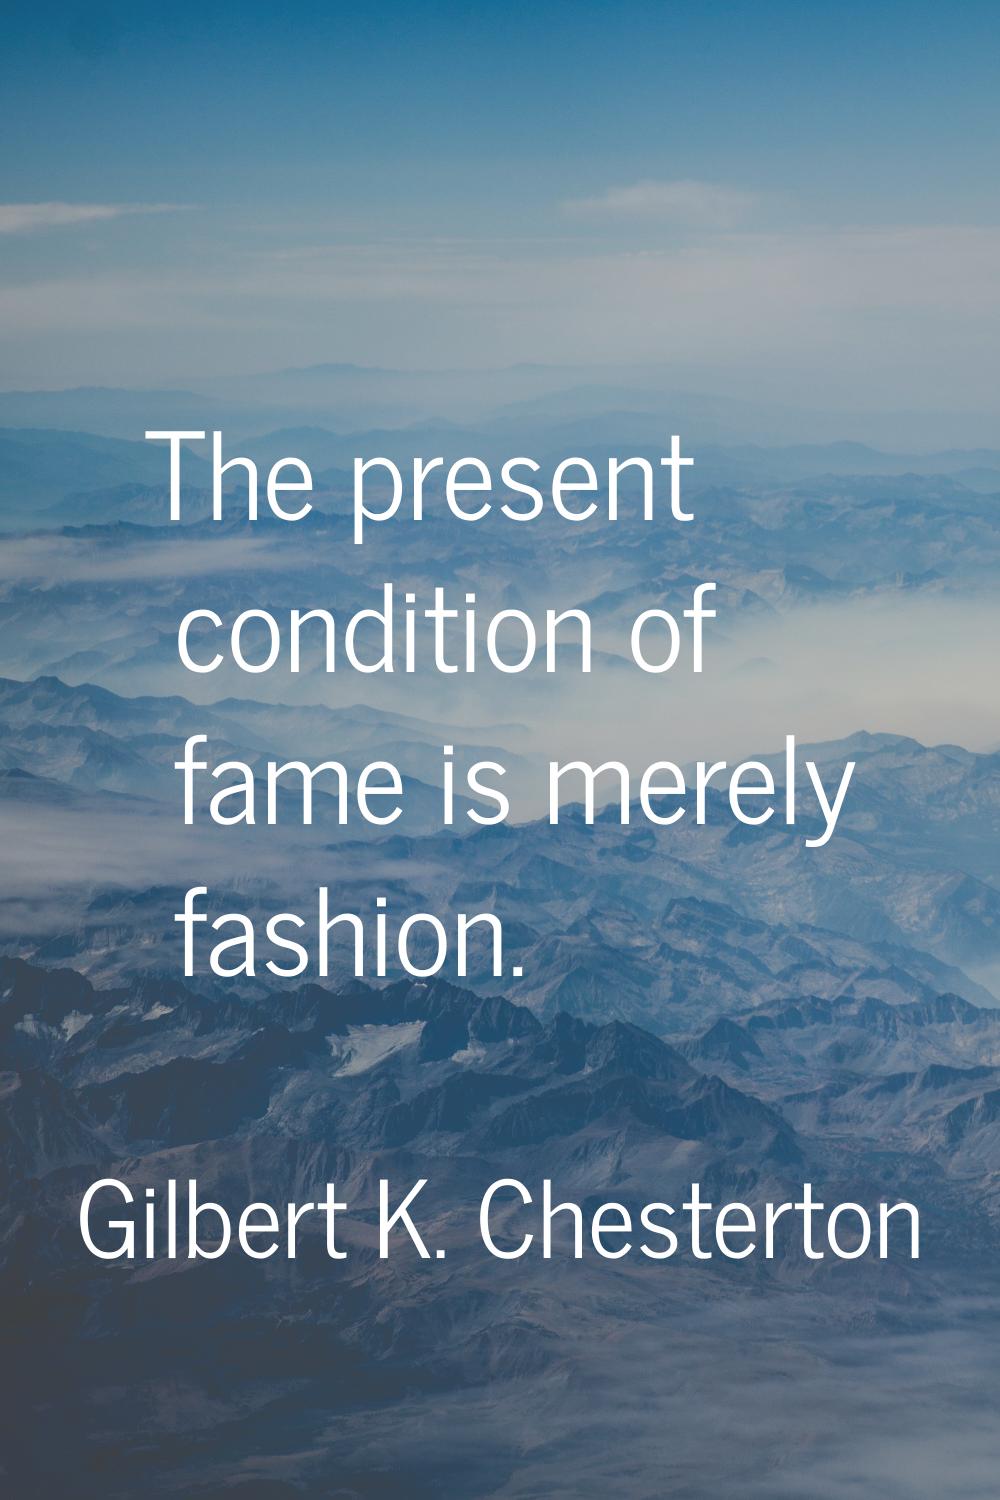 The present condition of fame is merely fashion.